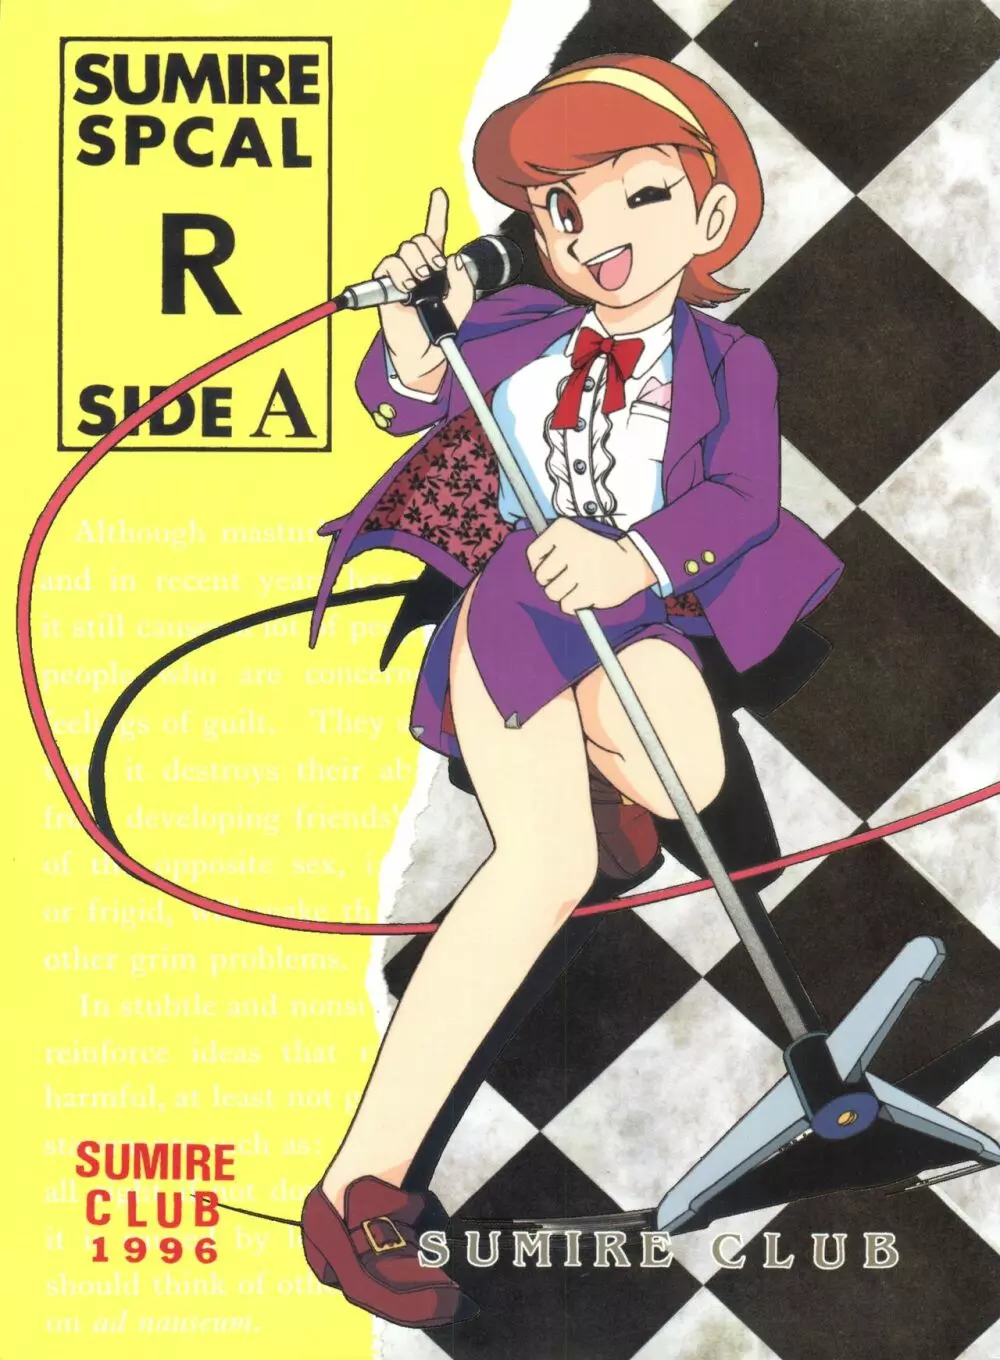 SUMIRE SPCAL R SIDE A